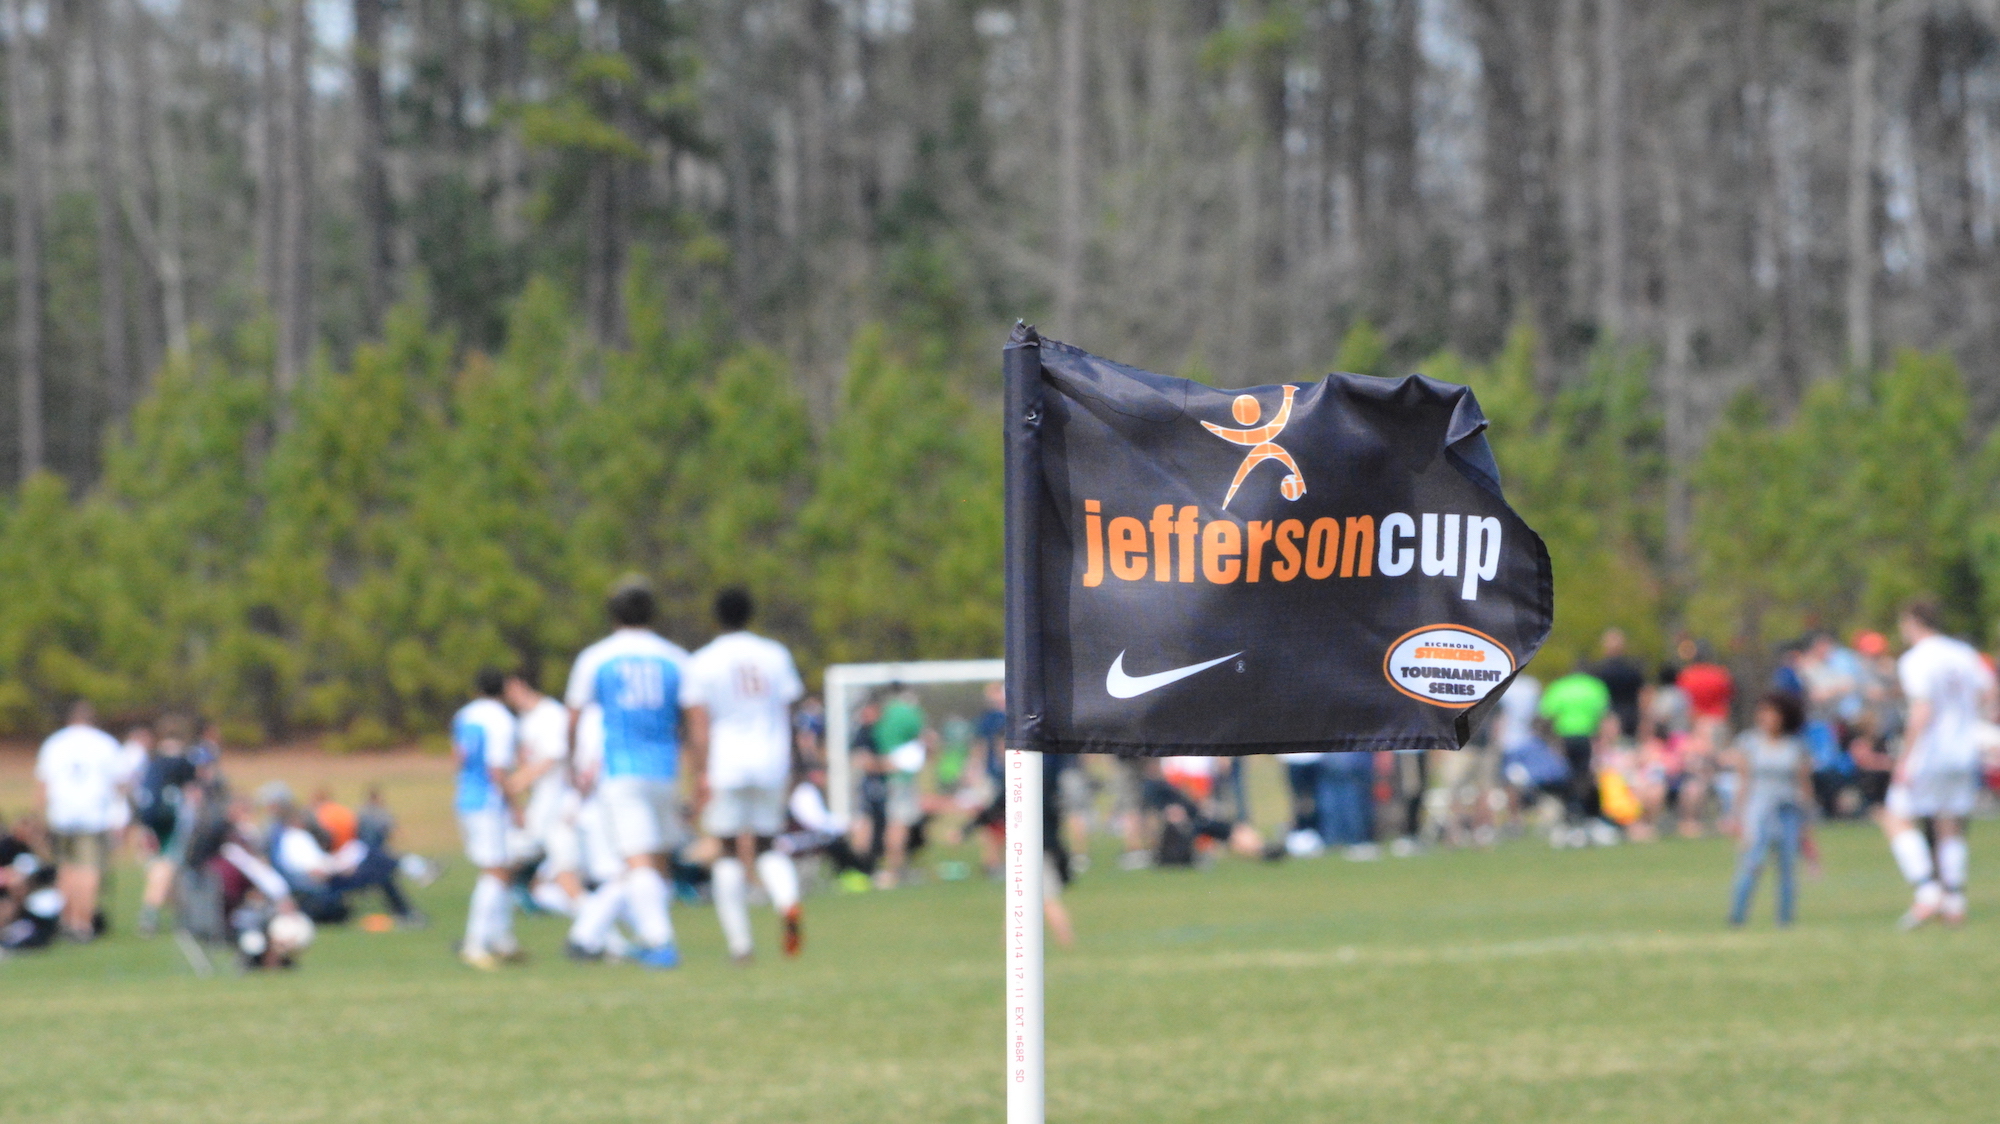 Jefferson Cup to resume in August with two weekends of competition